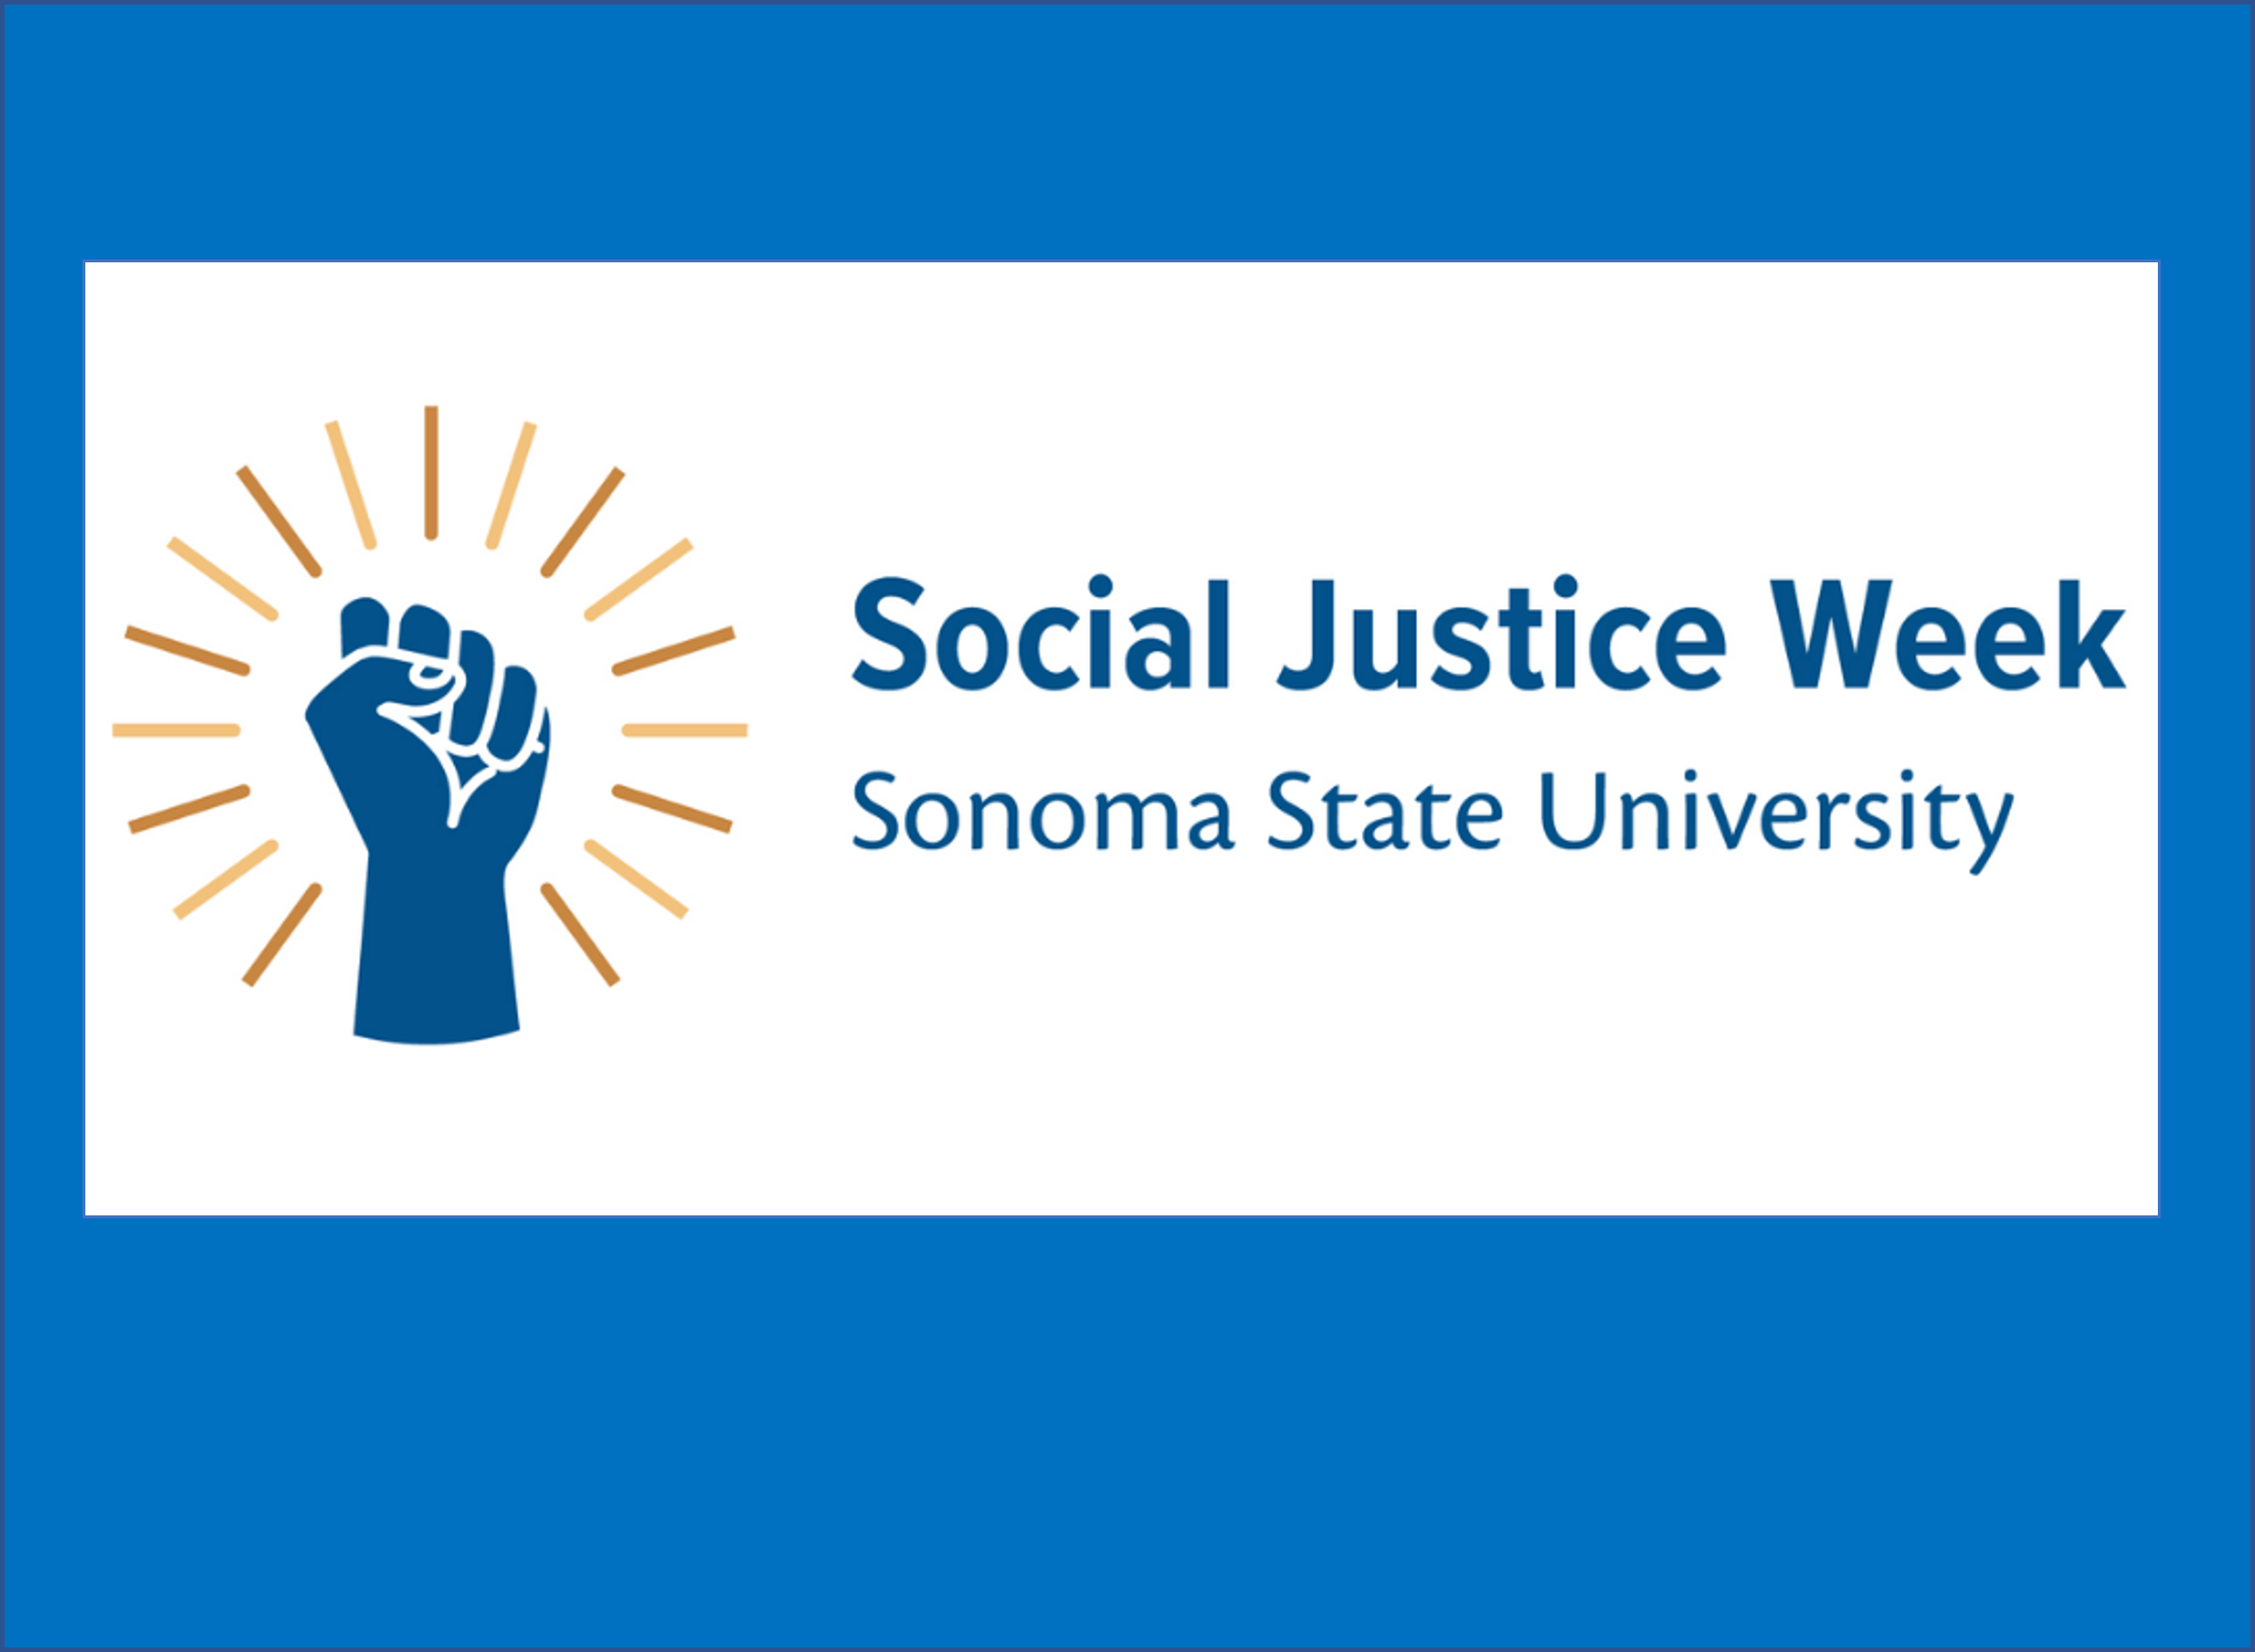 Social Justice Week Day 2 School of Social Sciences at Sonoma State